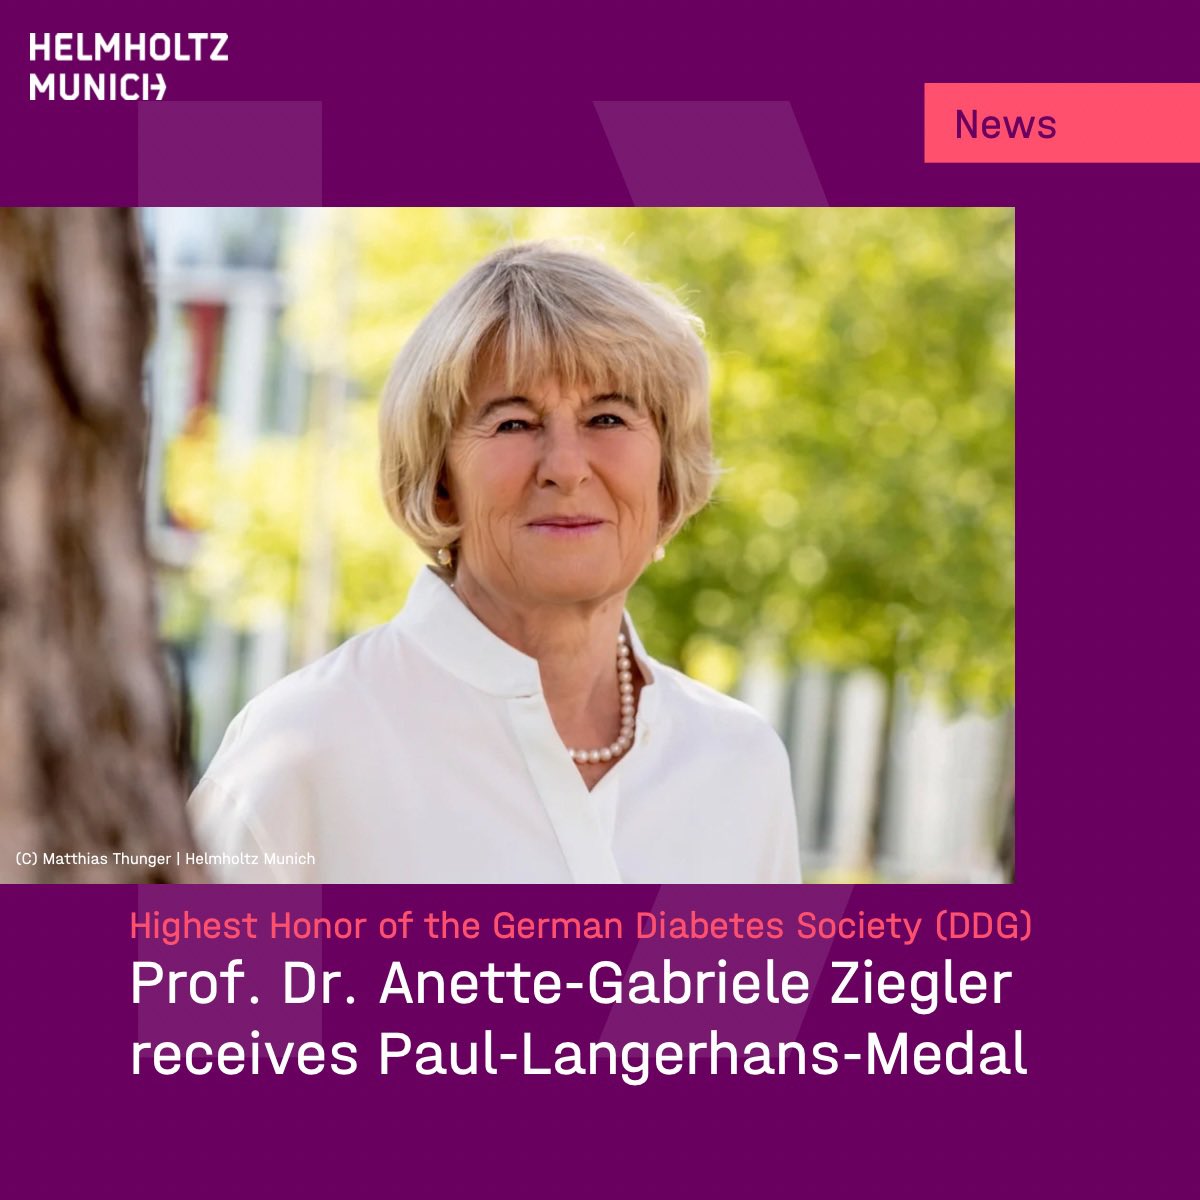 For her relentless efforts in early-detection and prevention of #Type1Diabetes, Helmholtz Munich researcher Anette-Gabriele Ziegler receives the Paul-Langerhans-Medal, highest honor of the @DDG_Tweets. Congratulations!

👉 Read more in the press release: t1p.de/6bmem